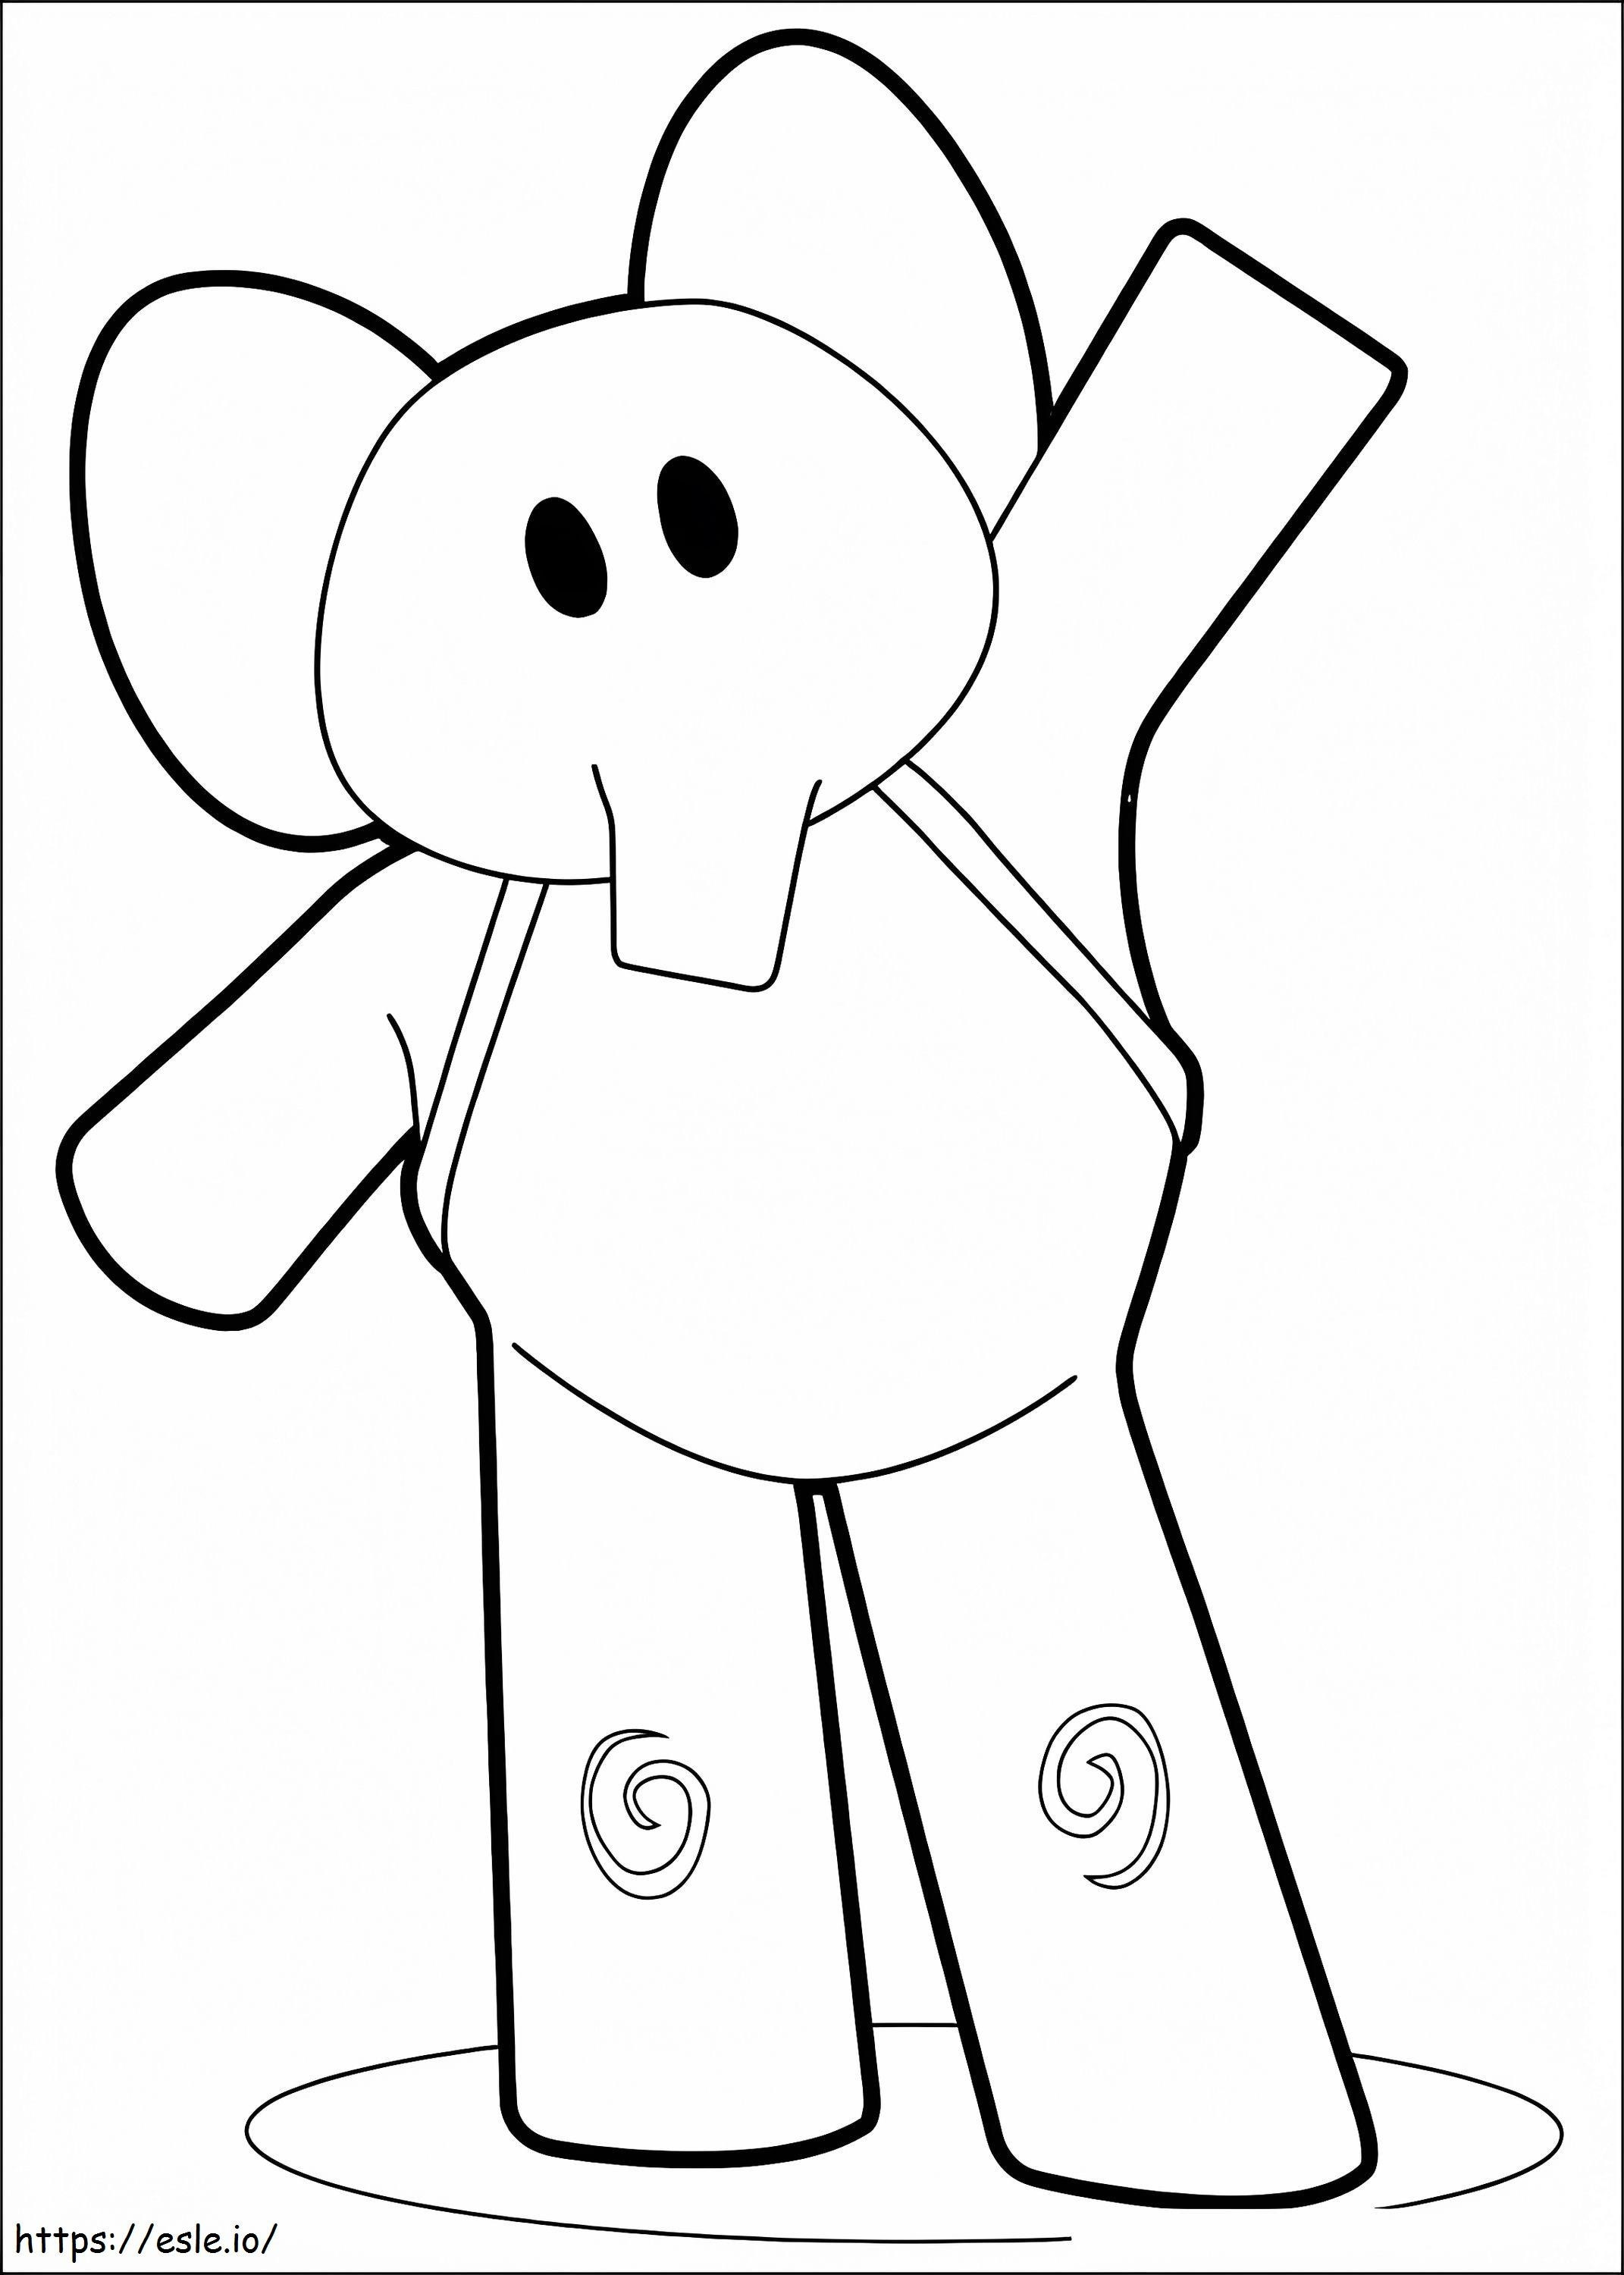 Elly Waving Hand coloring page